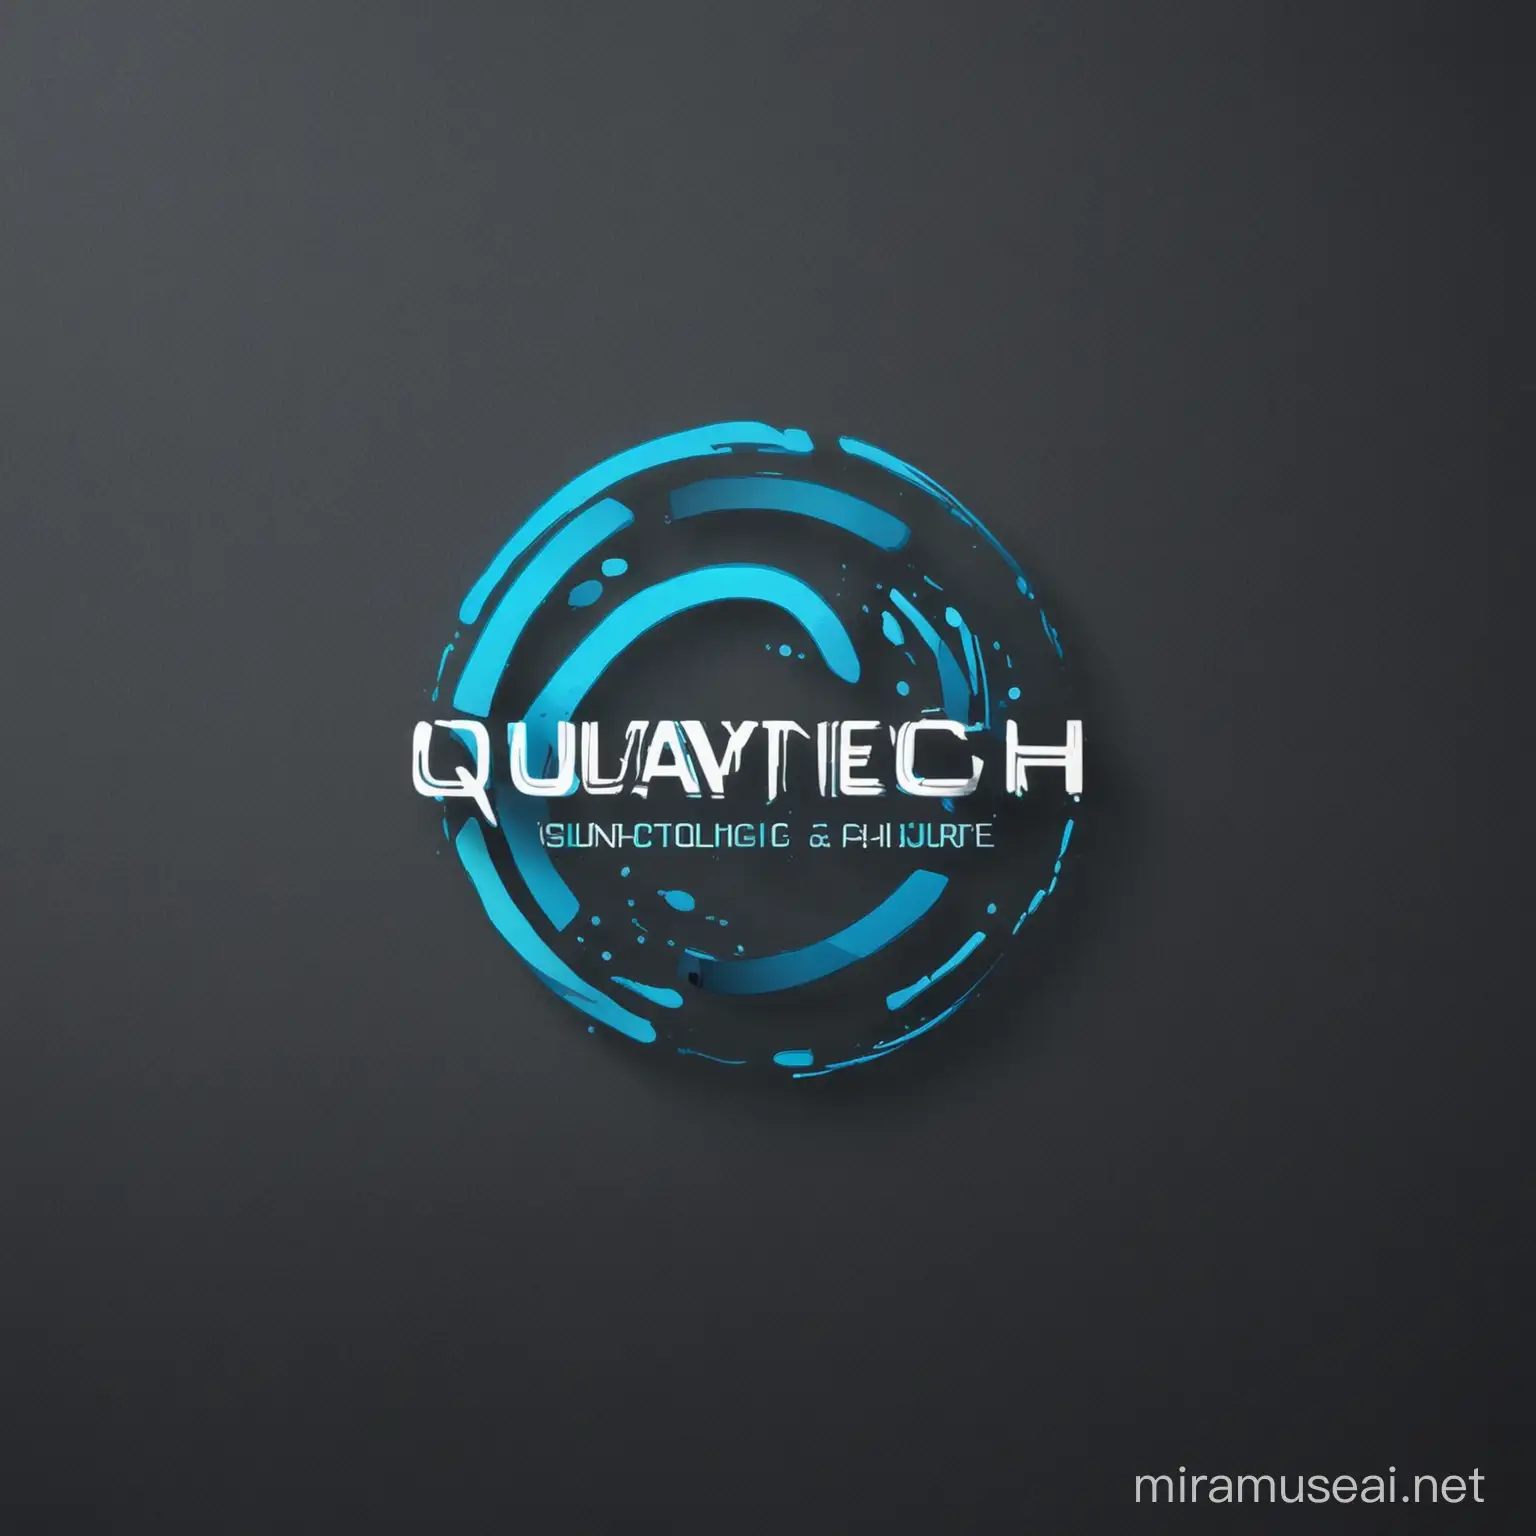 Generate a logo for a laptop and desktop computer store called QuayTech Electronics 